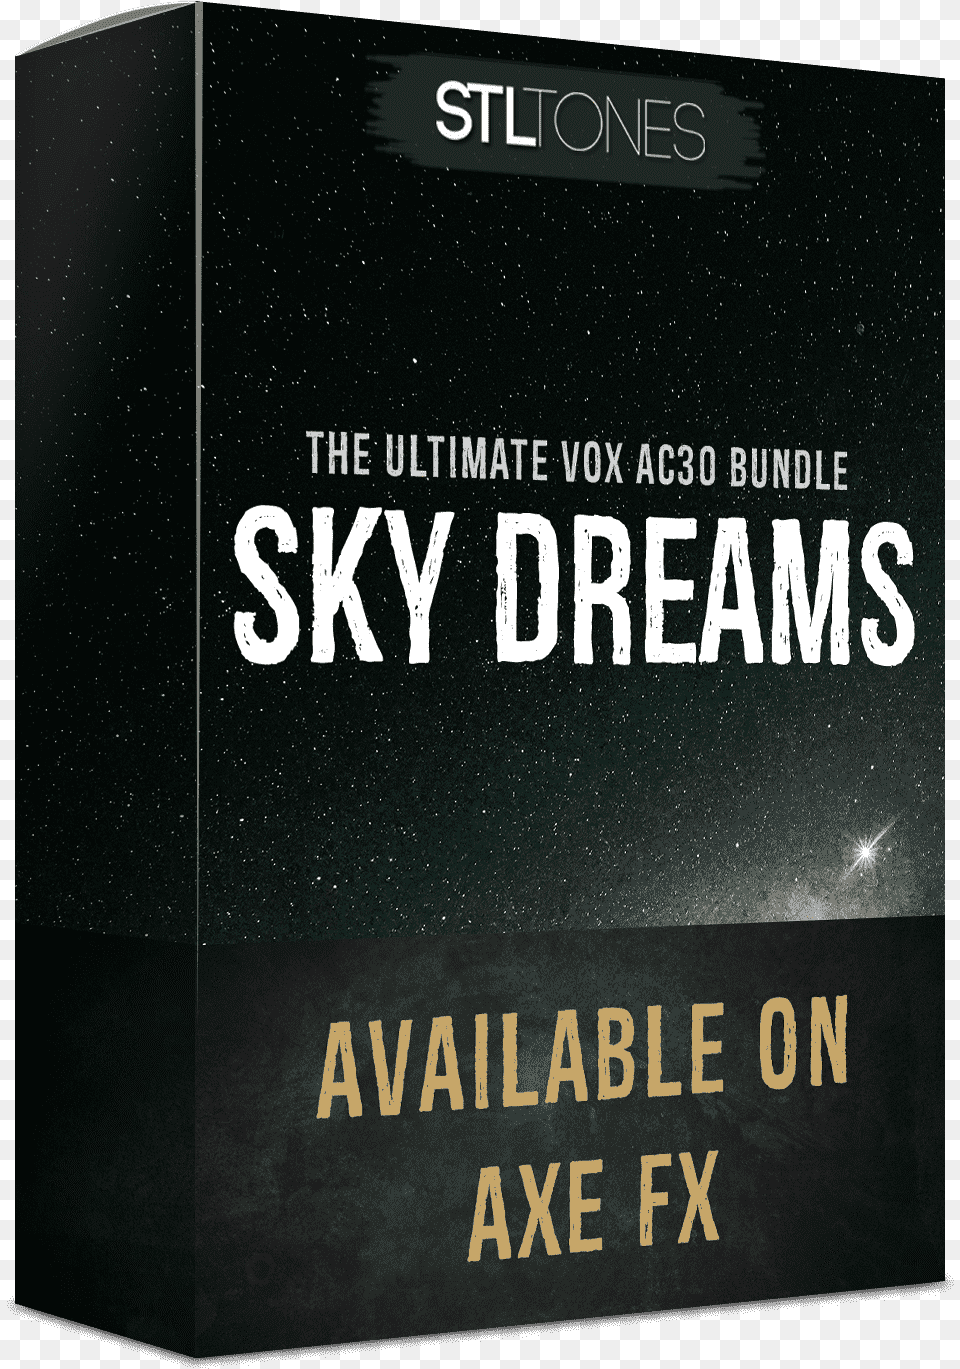 Sky Dreamsclass Lazyload Lazyload Fade In Cloudzoom Book Cover, Publication, Bottle Free Png